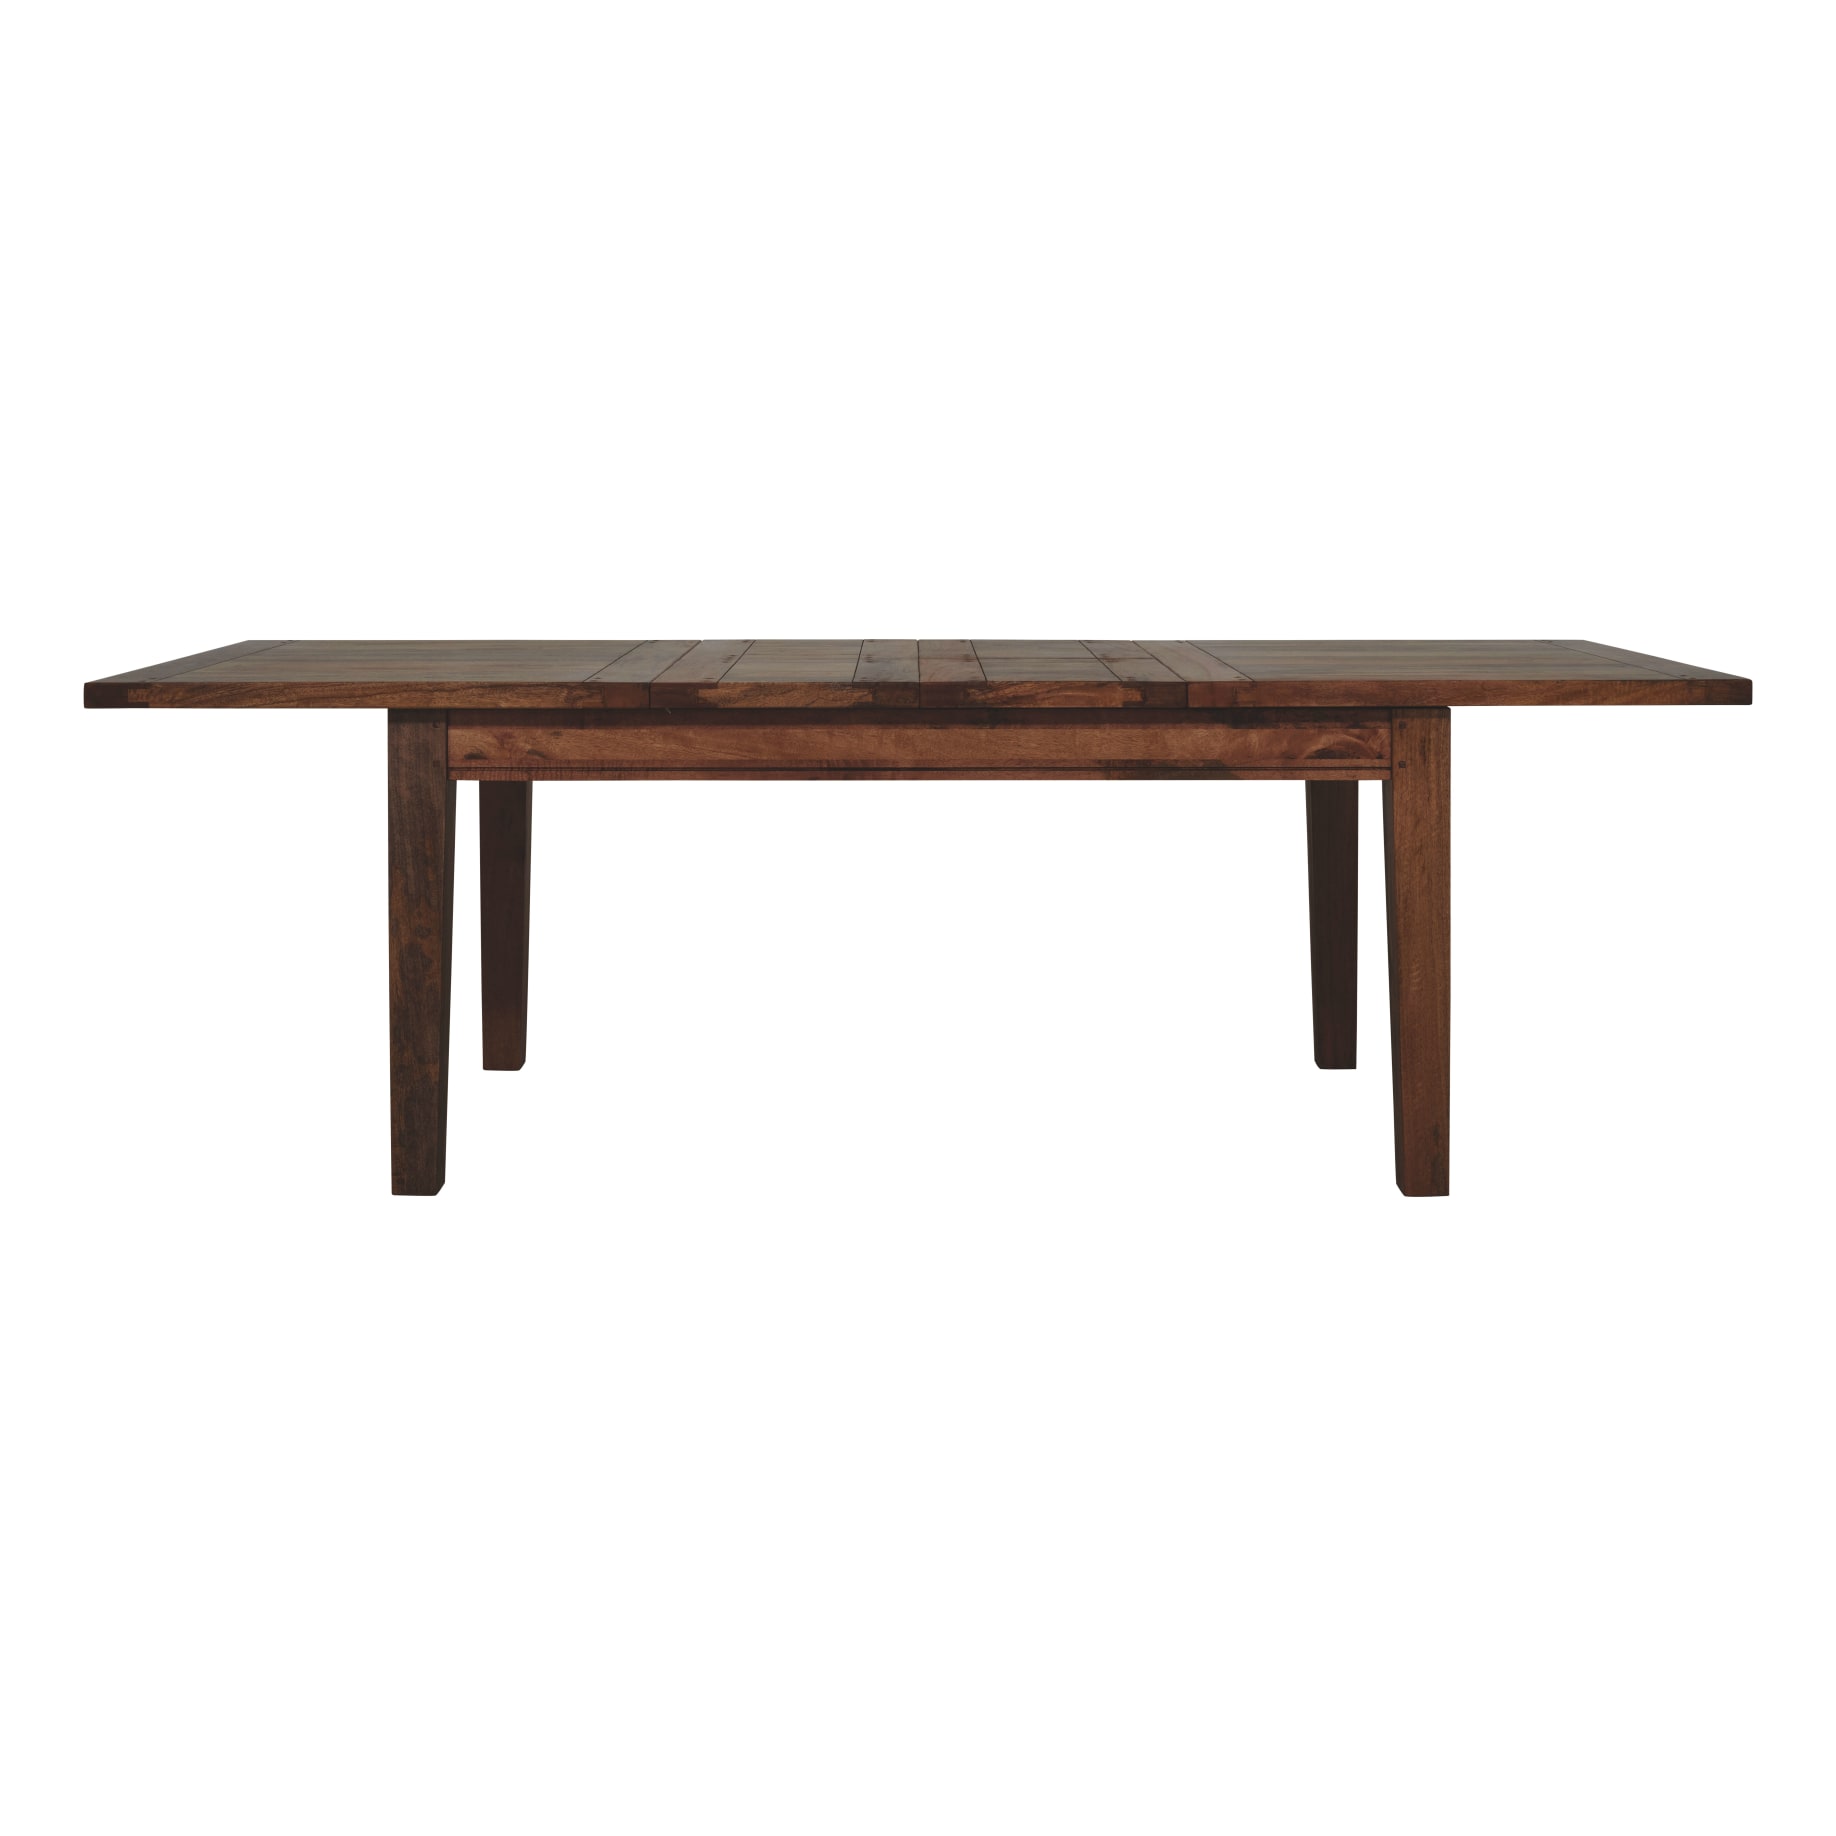 Mango Creek Extension Dining Table 170-250cm in Rustic Chocolate